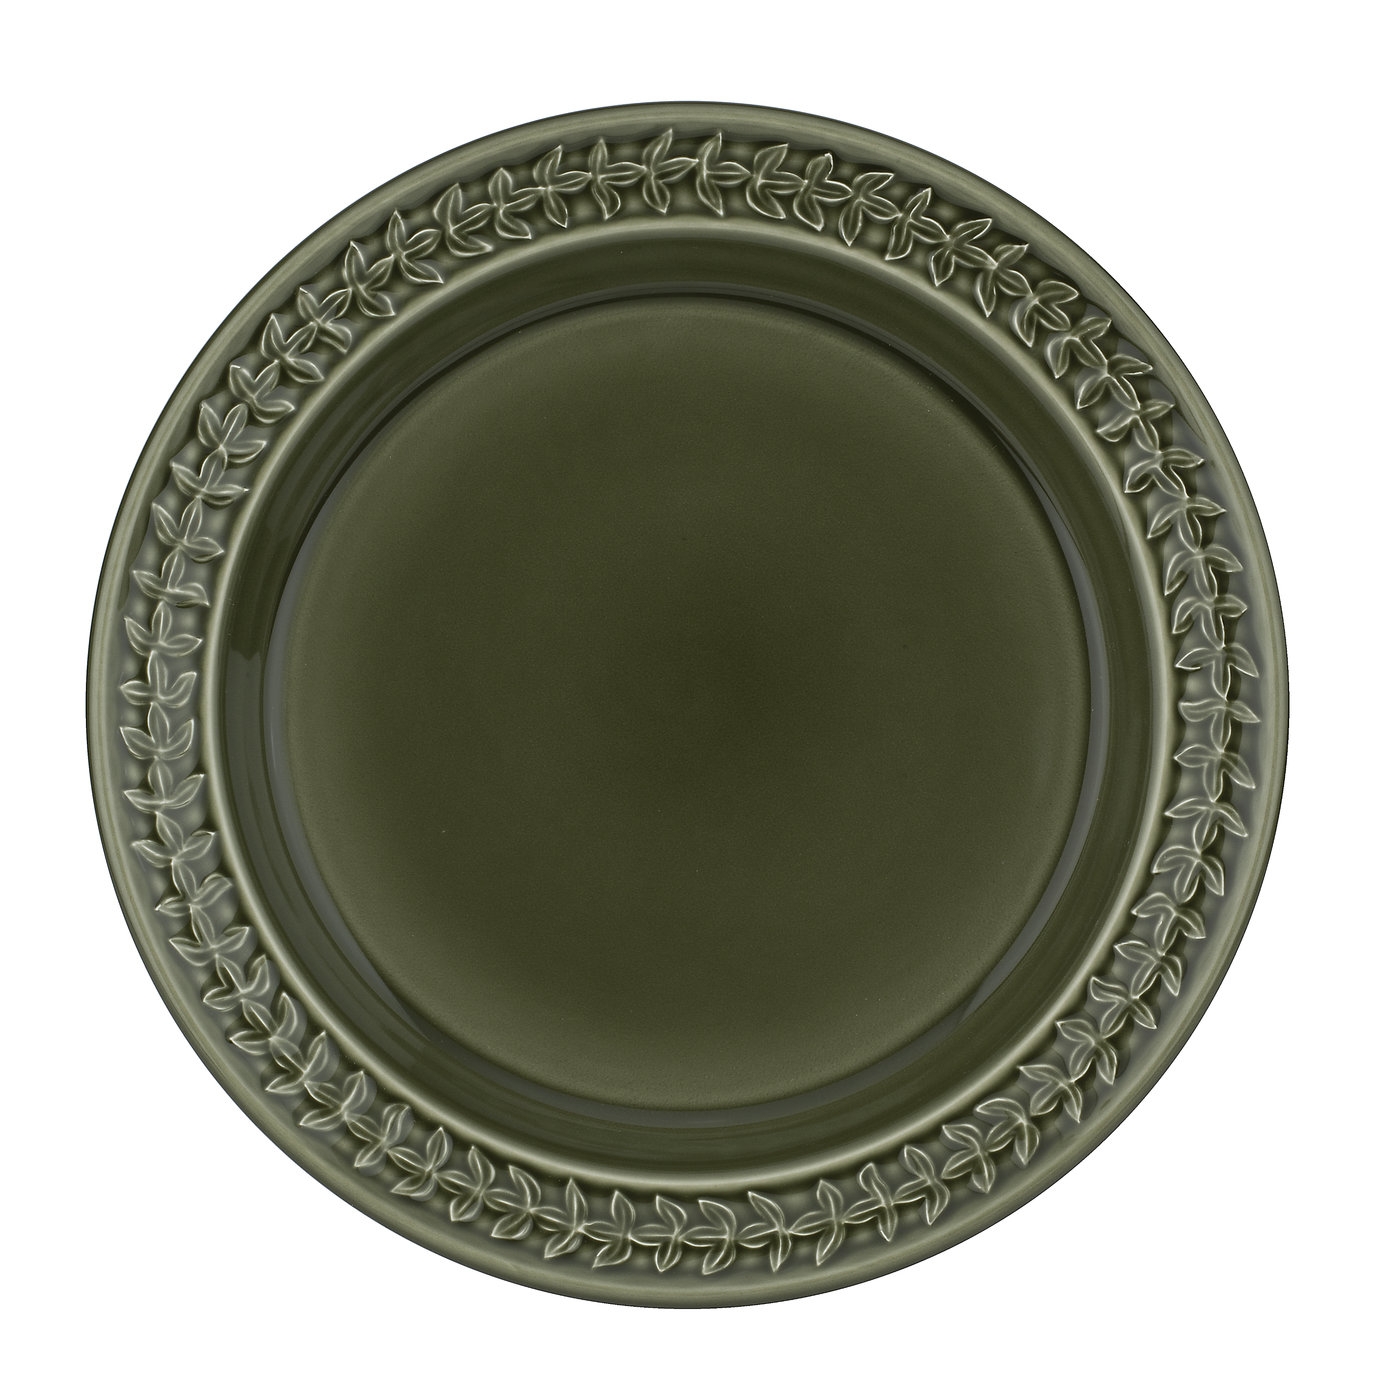 Botanic Garden Harmony Forest Green  8.5 Inch Salad Plate image number null